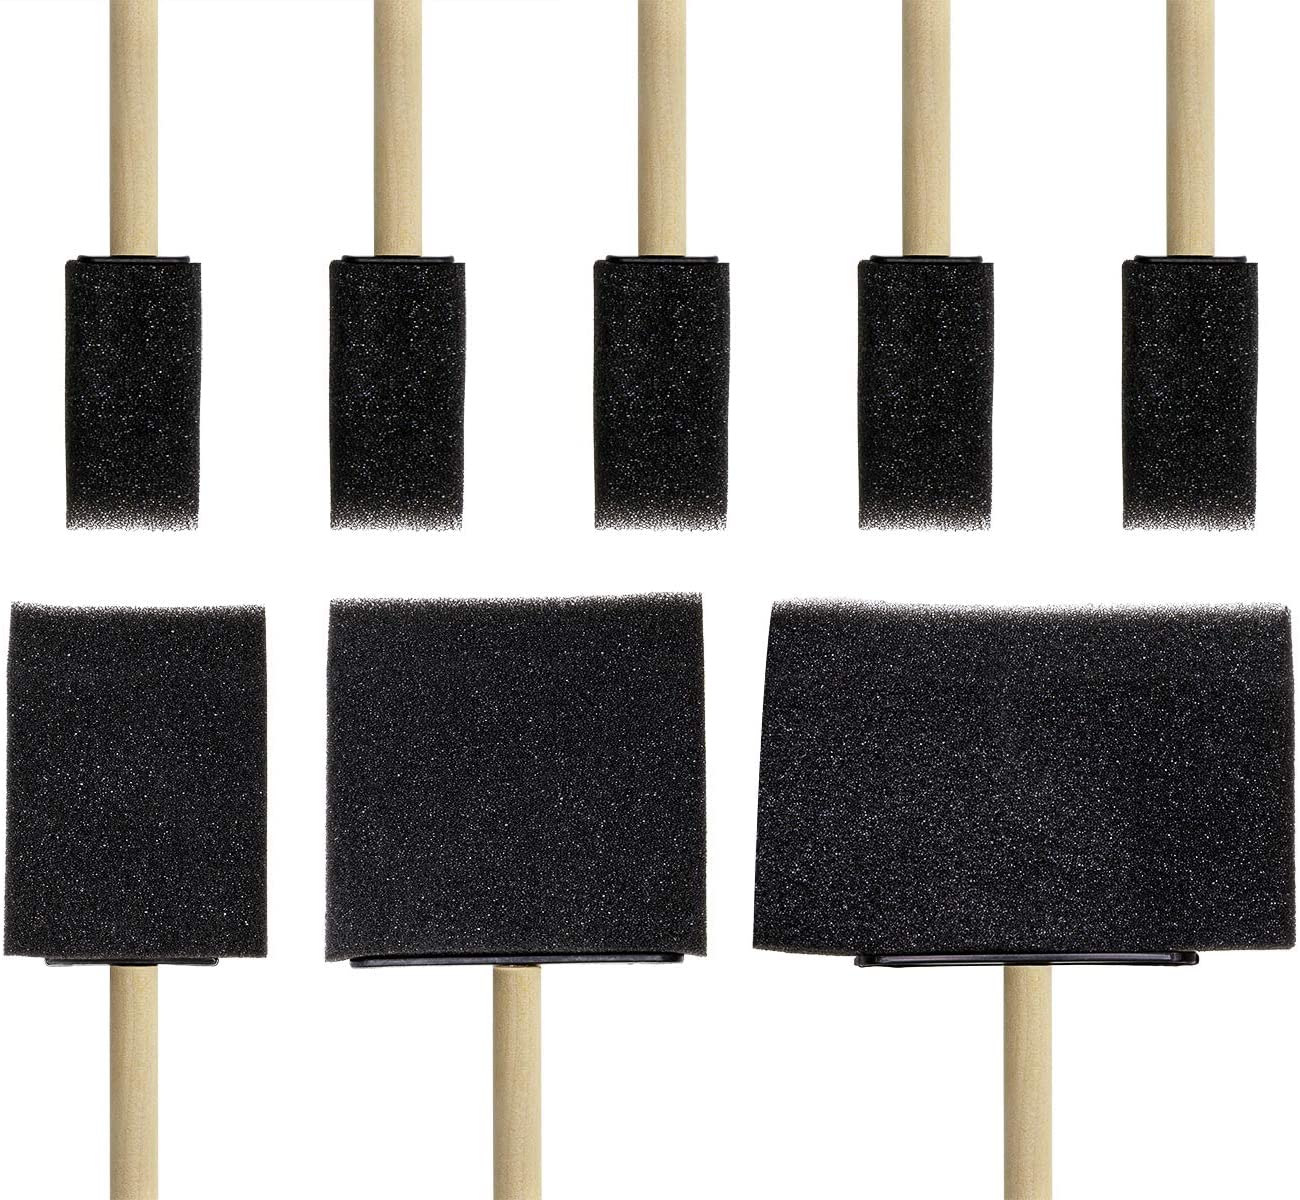 8pcs Sponge Brushes for Painting DIY Crafts Foam Paint Brush with Wooden Handles for Staining Stencils Art Project Decoupage Acrylics Varnishes Enamel